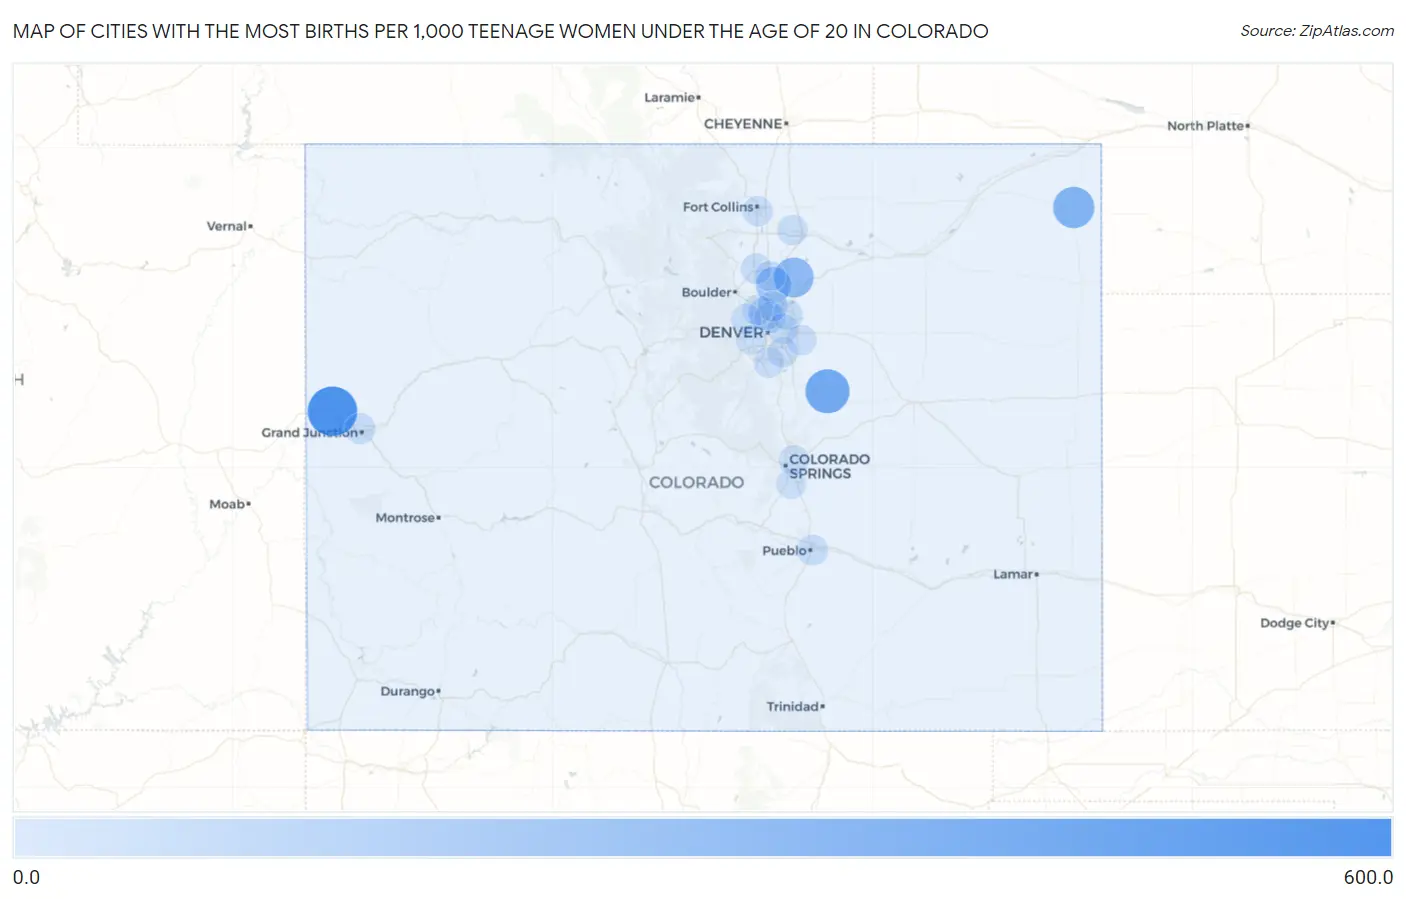 Cities with the Most Births per 1,000 Teenage Women Under the Age of 20 in Colorado Map